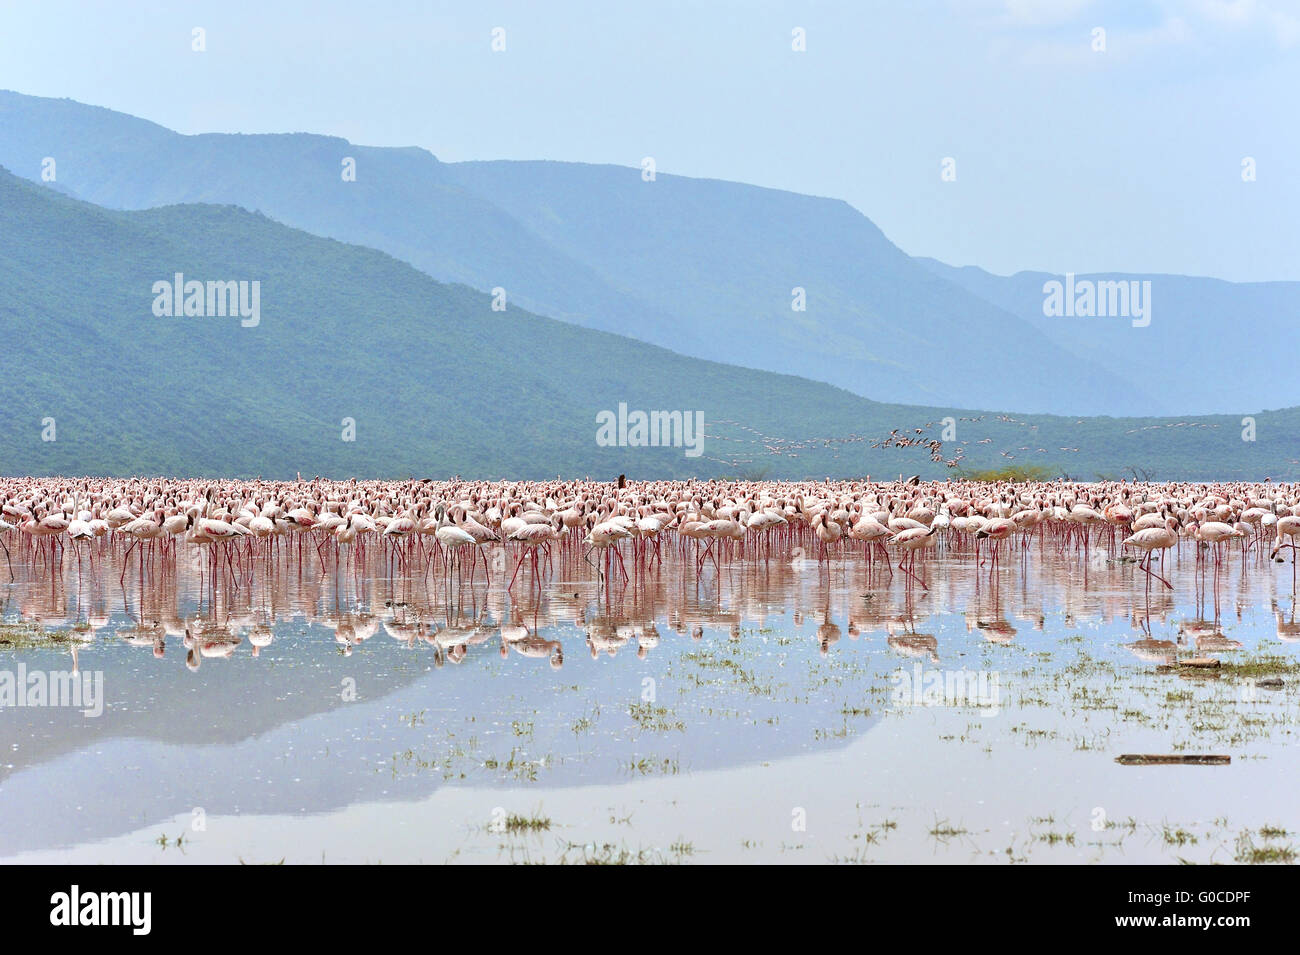 Landscape of Lake Bogoria with innumberable Lesser Stock Photo